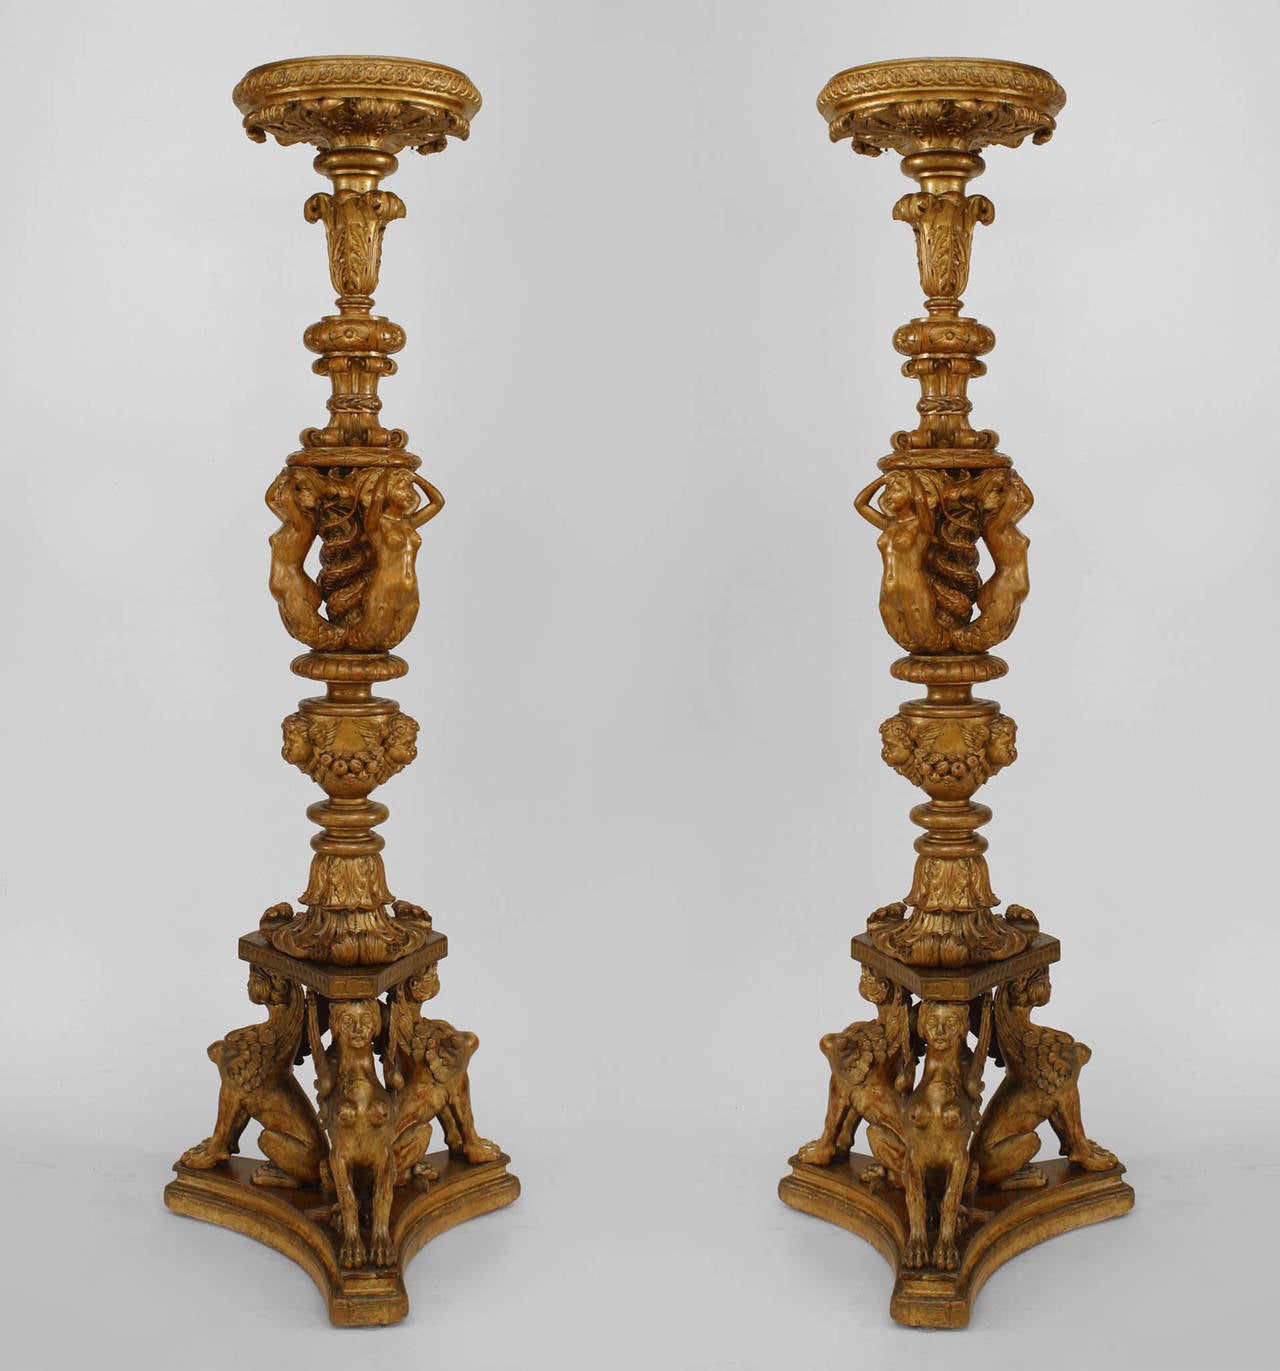 Pair of French Louis XVI style (19th Cent) gilt pedestals with 3 carved mermaid and griffins at base.
